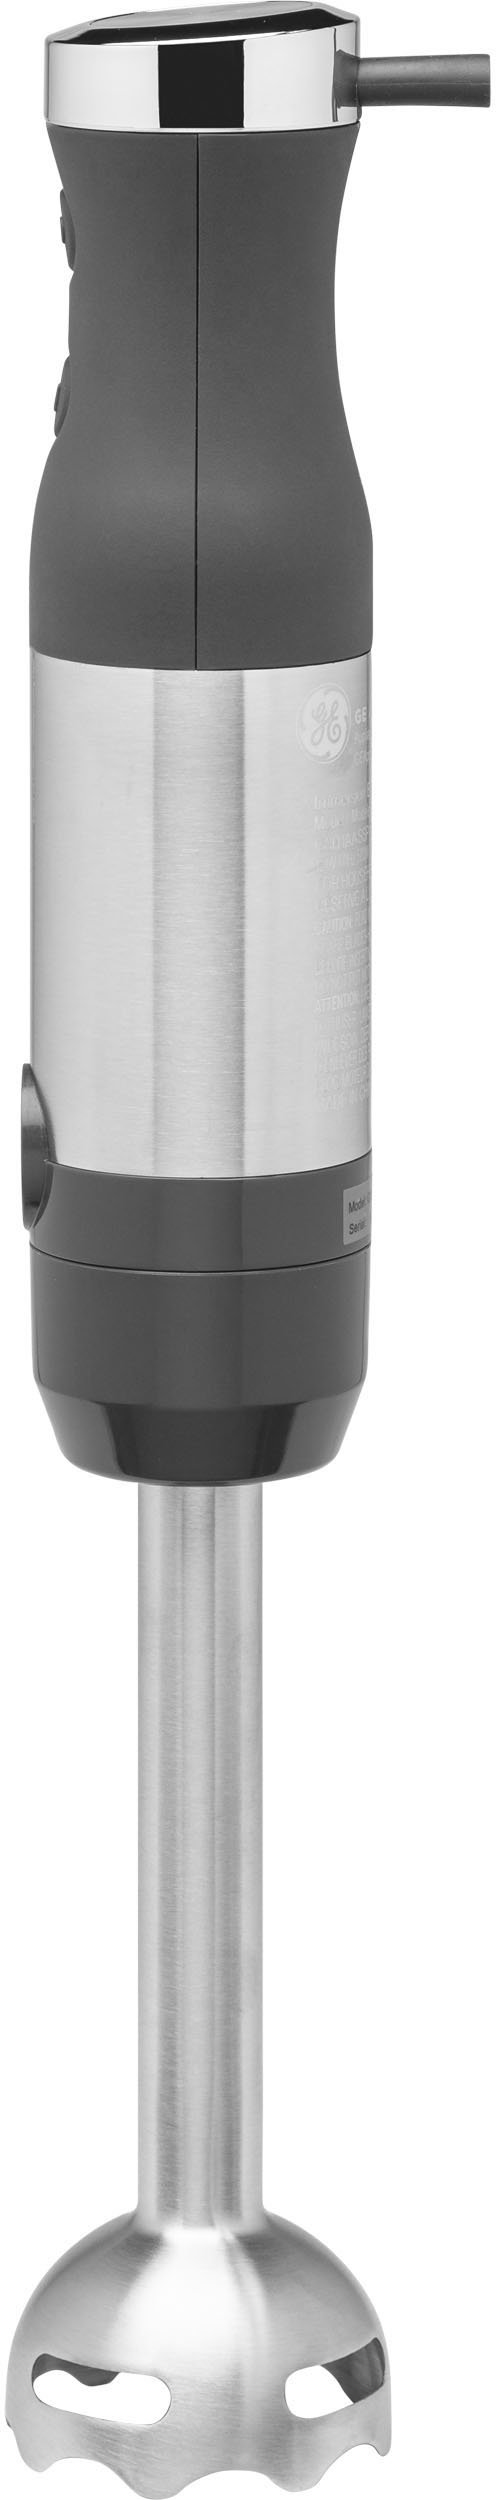 Angle View: Cuisinart - Smart Stick Variable Speed Hand Blender - Silver